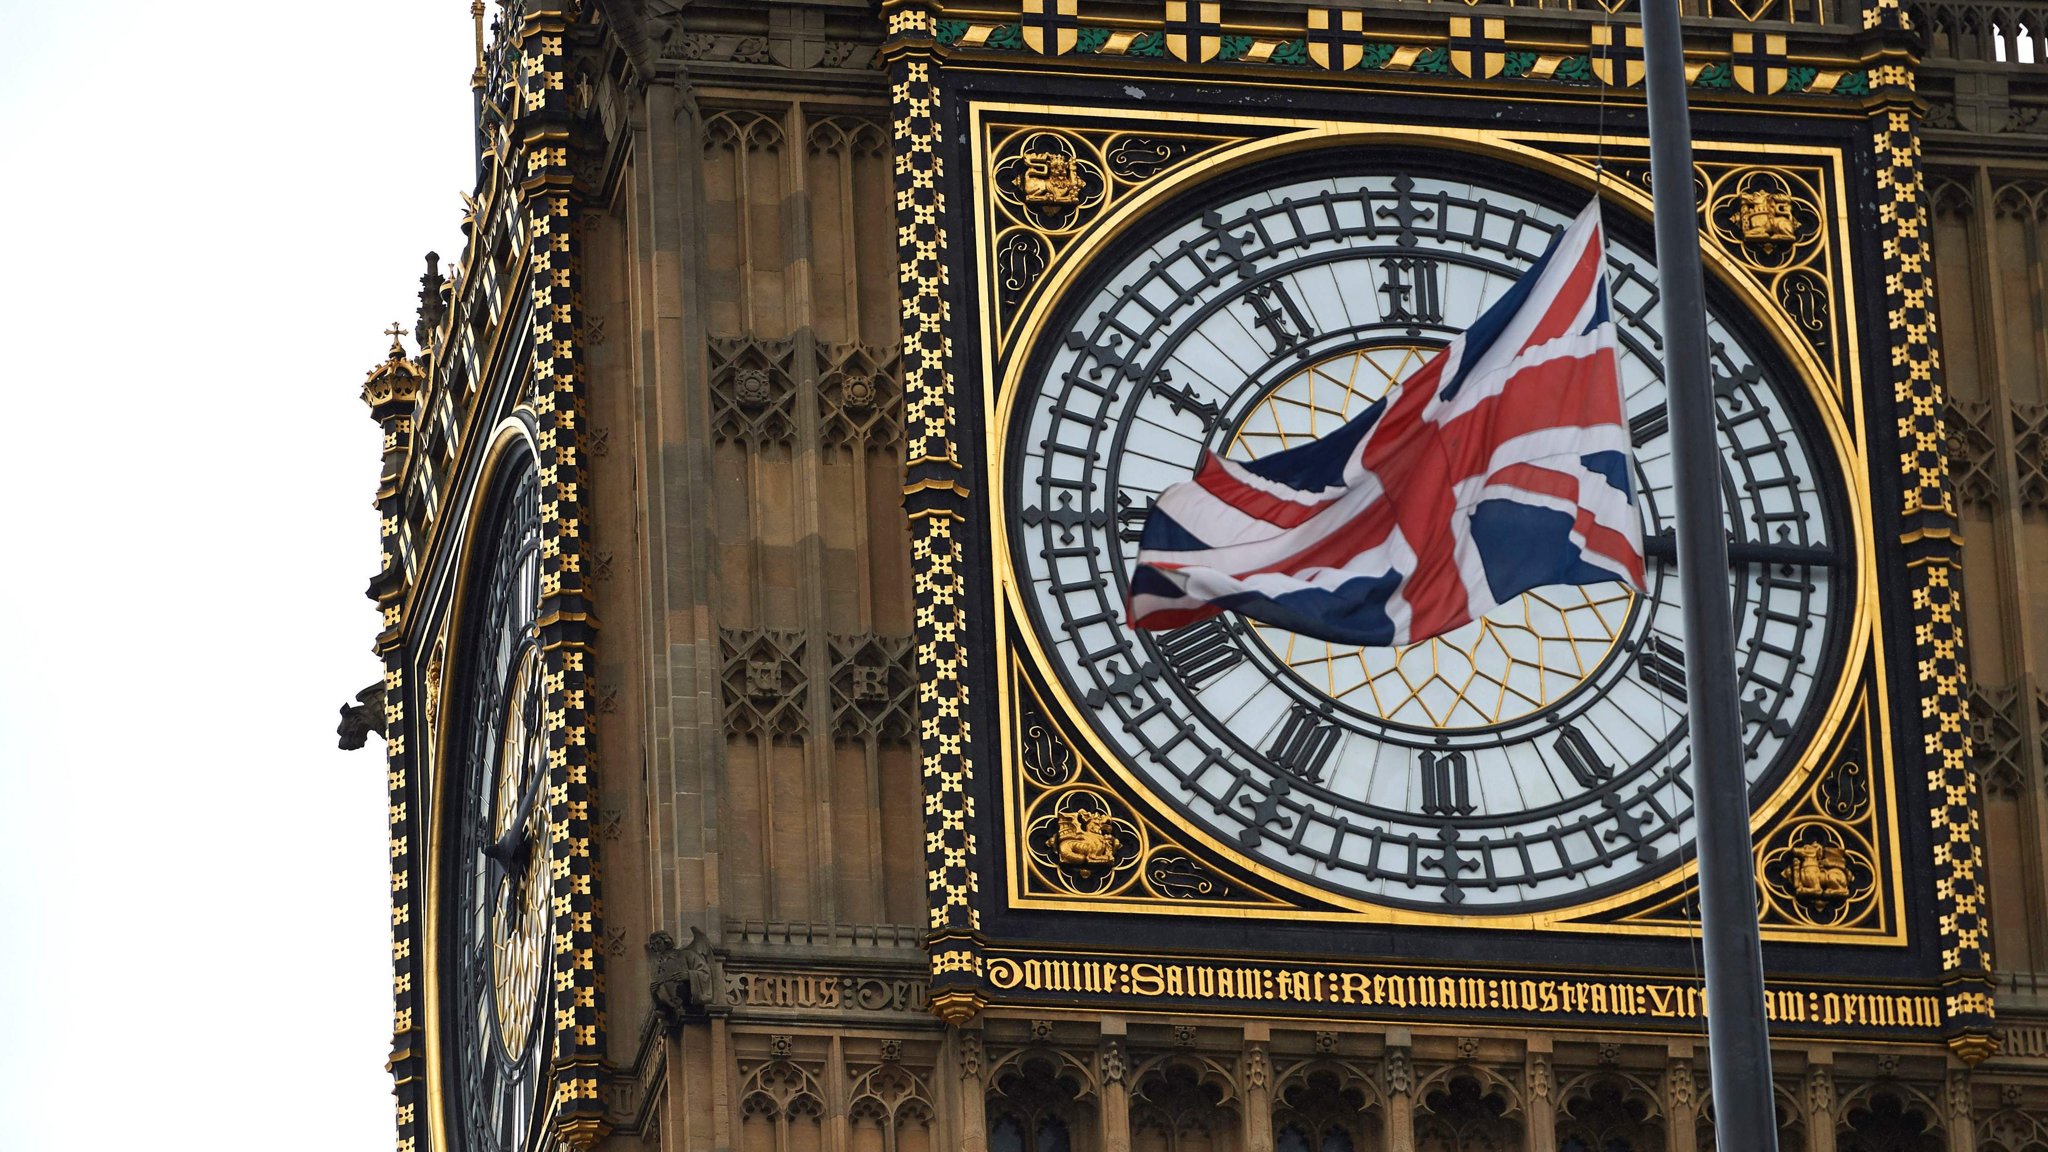 who is big ben named after and when was the clock tower in london built